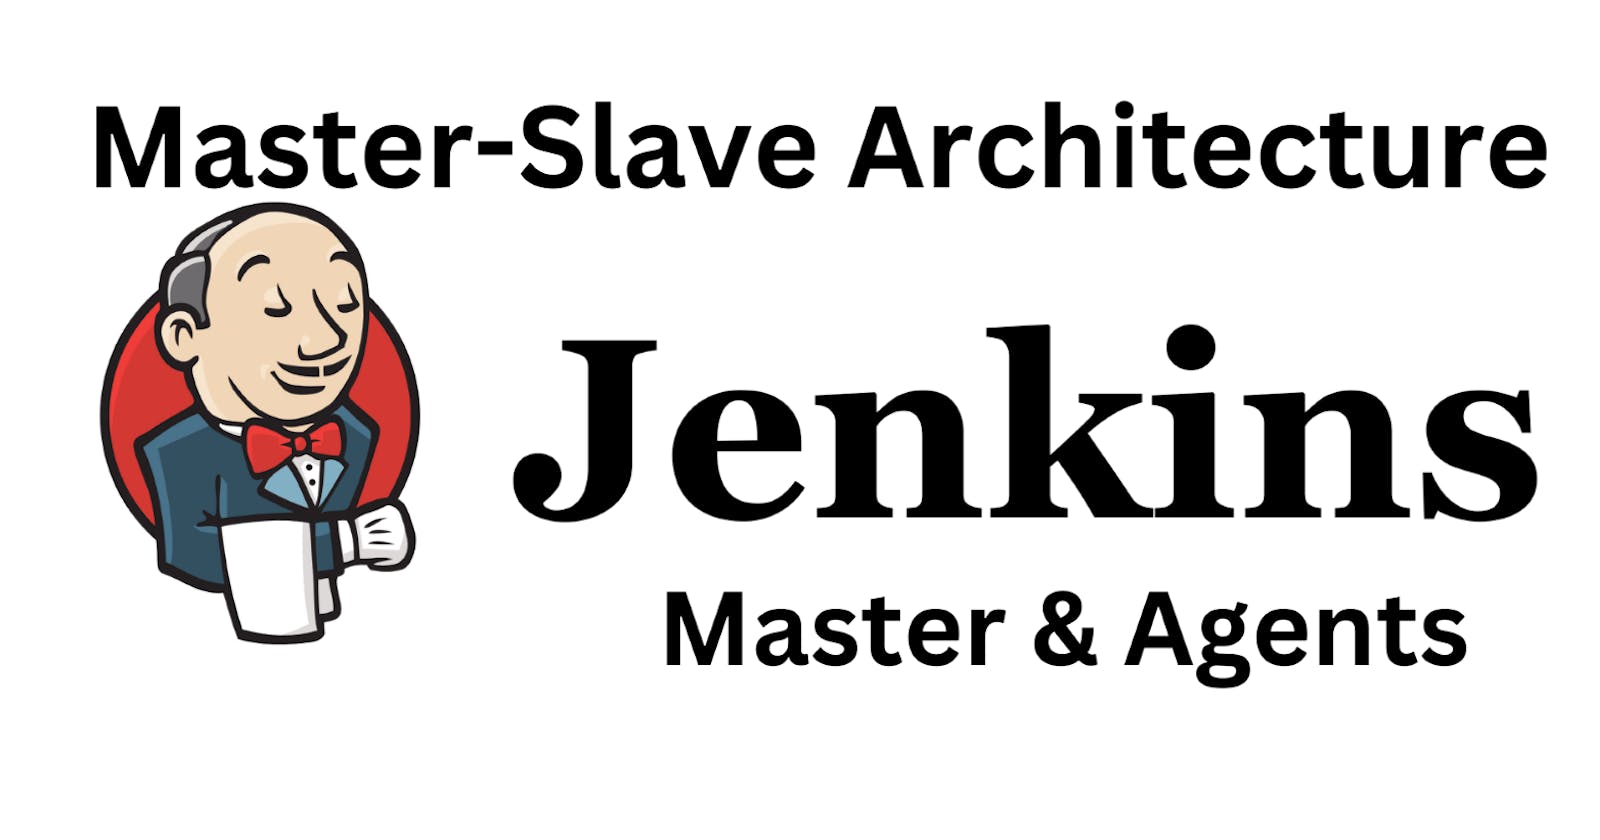 Efficient CI/CD with Jenkins: Exploring Master-Slave Architecture and Agents